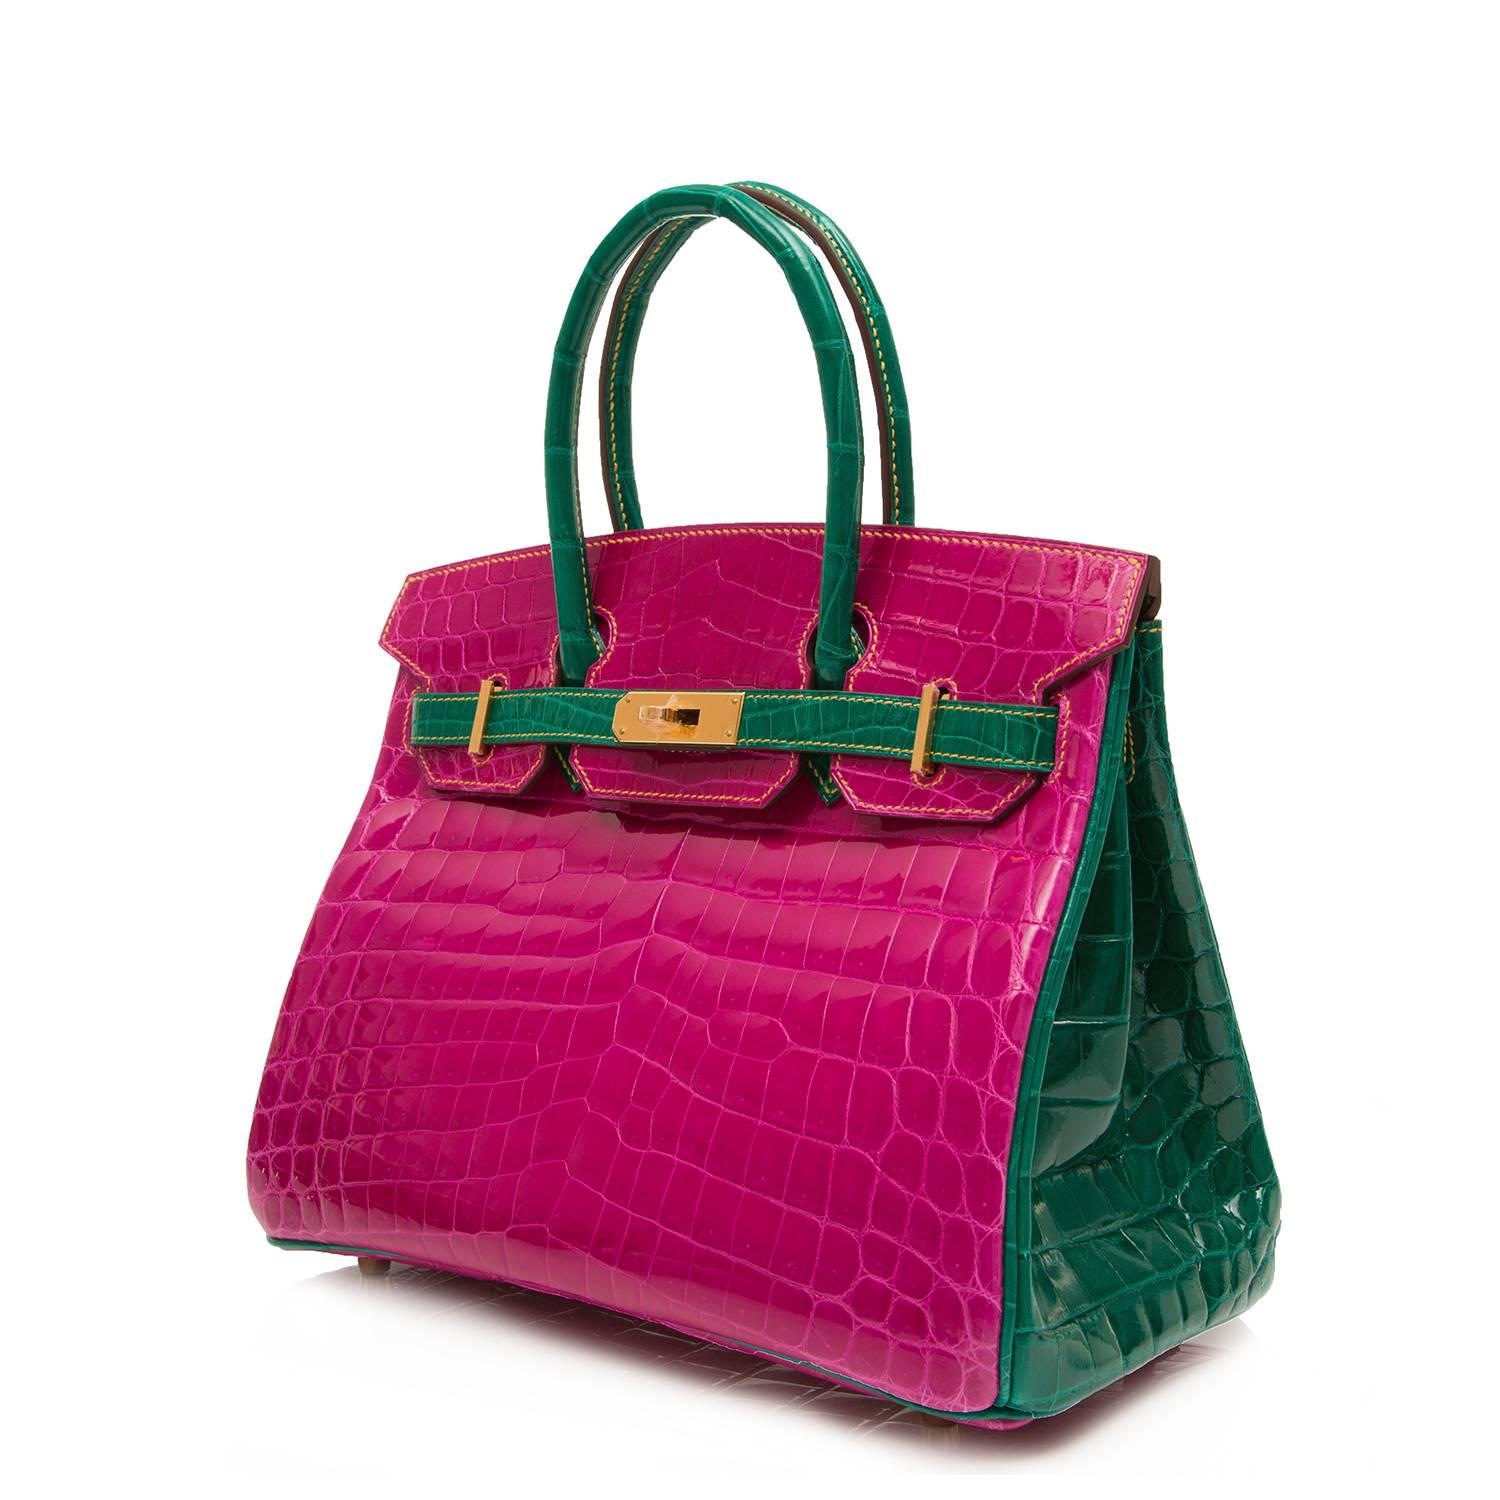 This Hermès 30 cm Birkin bag features  a vivid bi-tone of Rose Scheherazade and Emerald green Niloticus crocodile skin offset with gold-plated hardware and yellow stitching. This special order horseshoe Birkin 30 bag was purchased in 2016 and